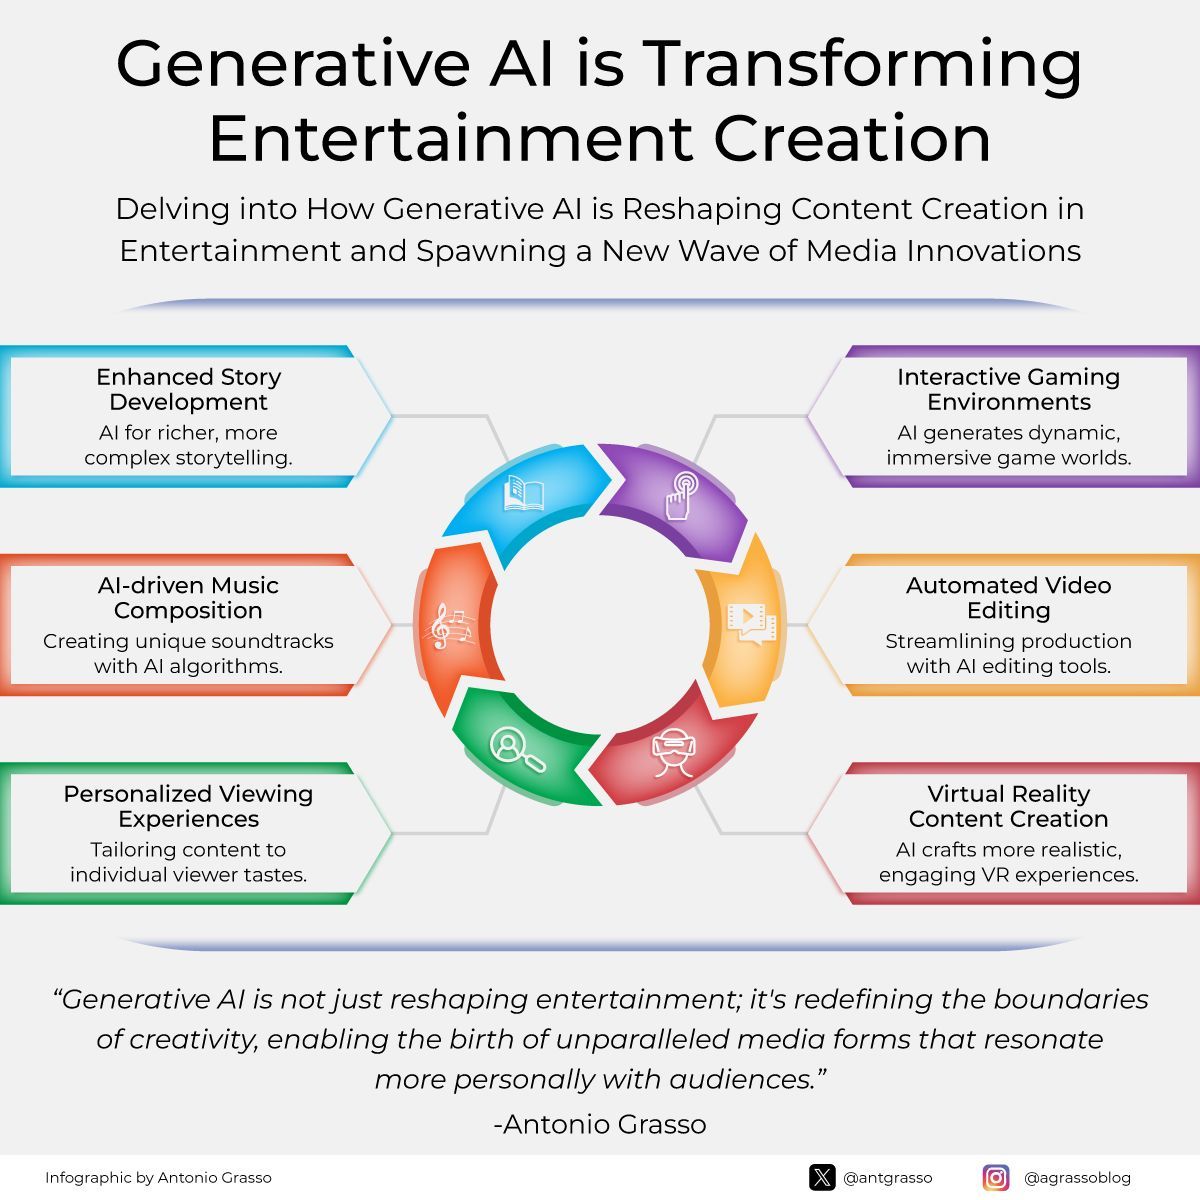 Generative AI reshapes entertainment with advanced storytelling, music composition, and gaming experiences. It streamlines processes like video editing and offers personalized content. In virtual reality, it intensifies realism, revolutionizing creativity. Microblog @antgrasso